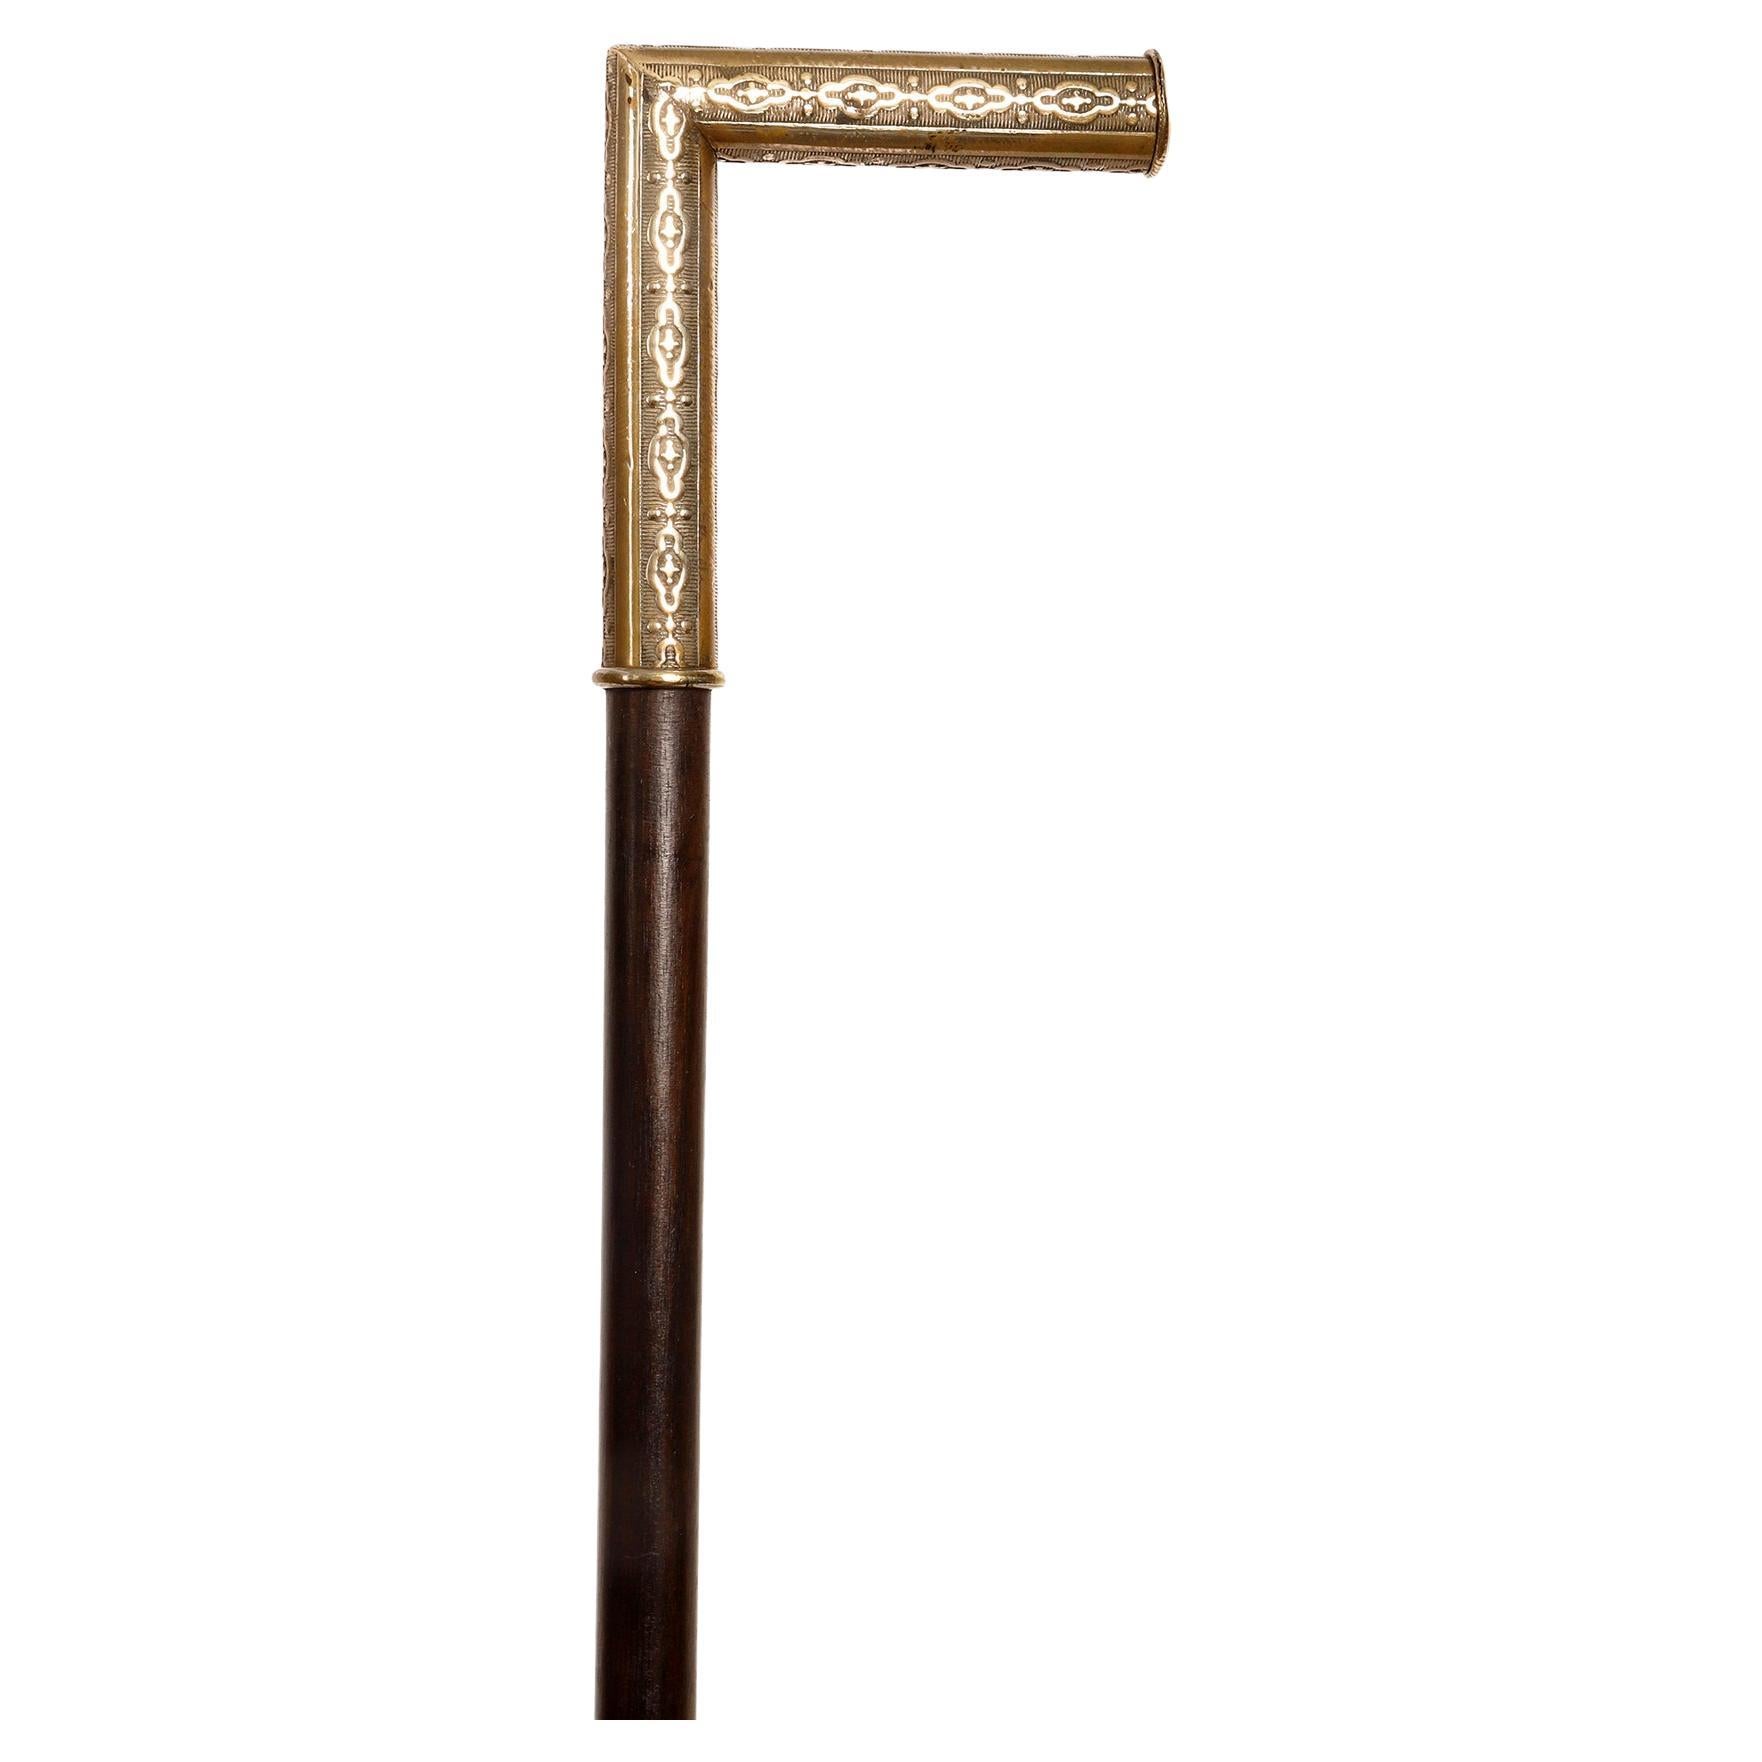 System walking stick, matches holder, Italy 1880. 